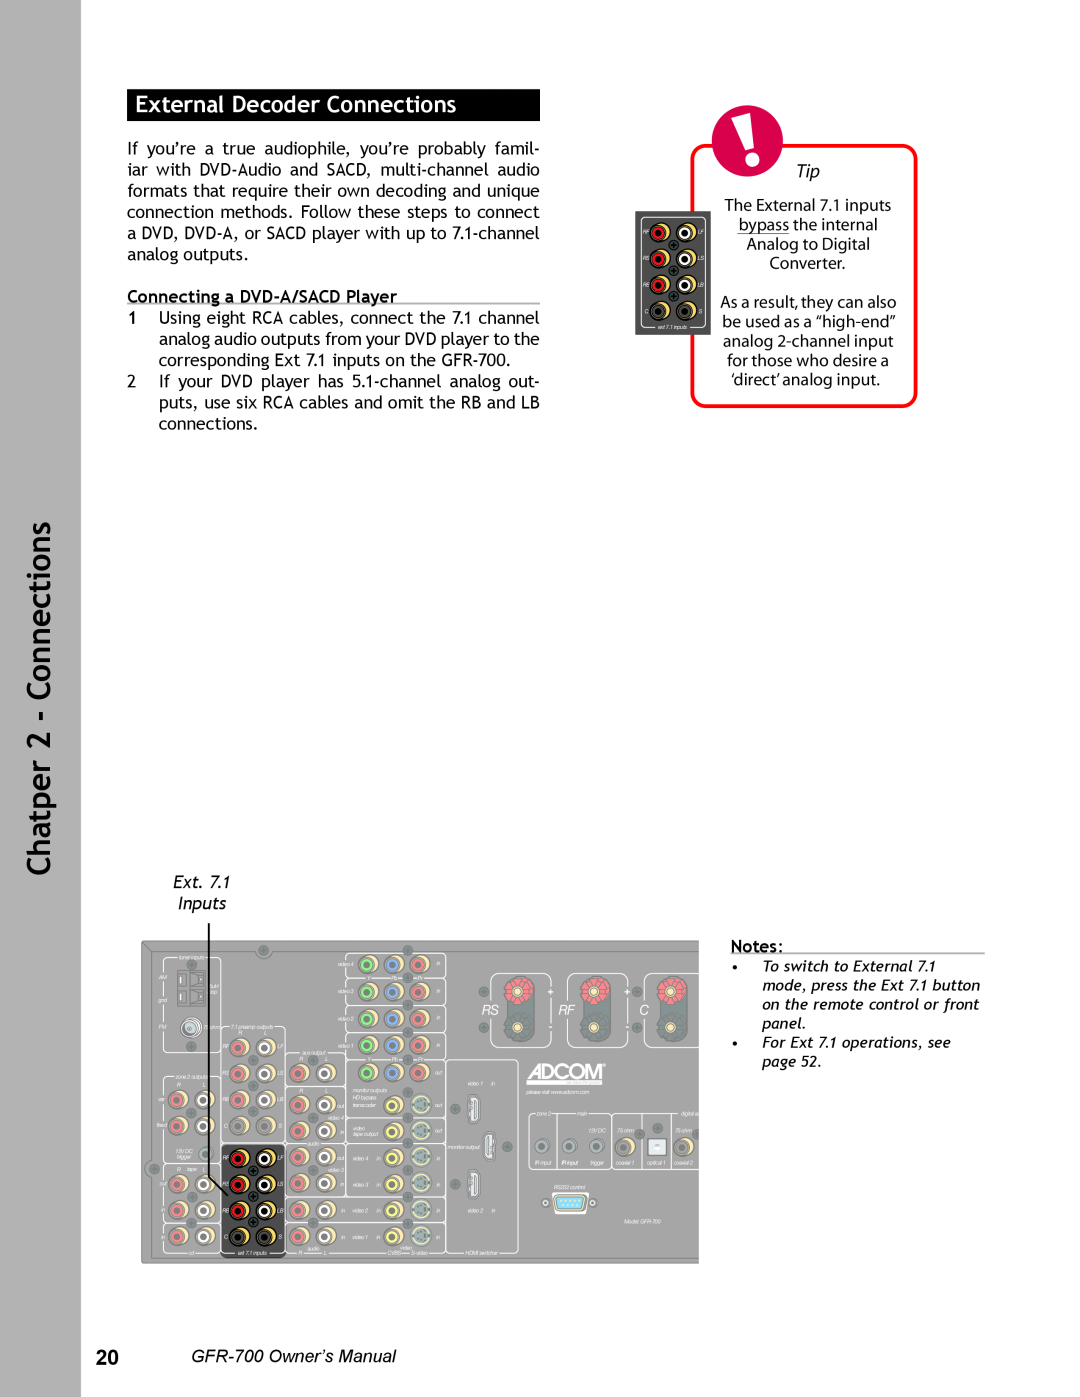 Adcom GFR-700 user manual External Decoder Connections, Connecting a DVD-A/SACDPlayer, Ext. Inputs, Chatper 2 - Connections 